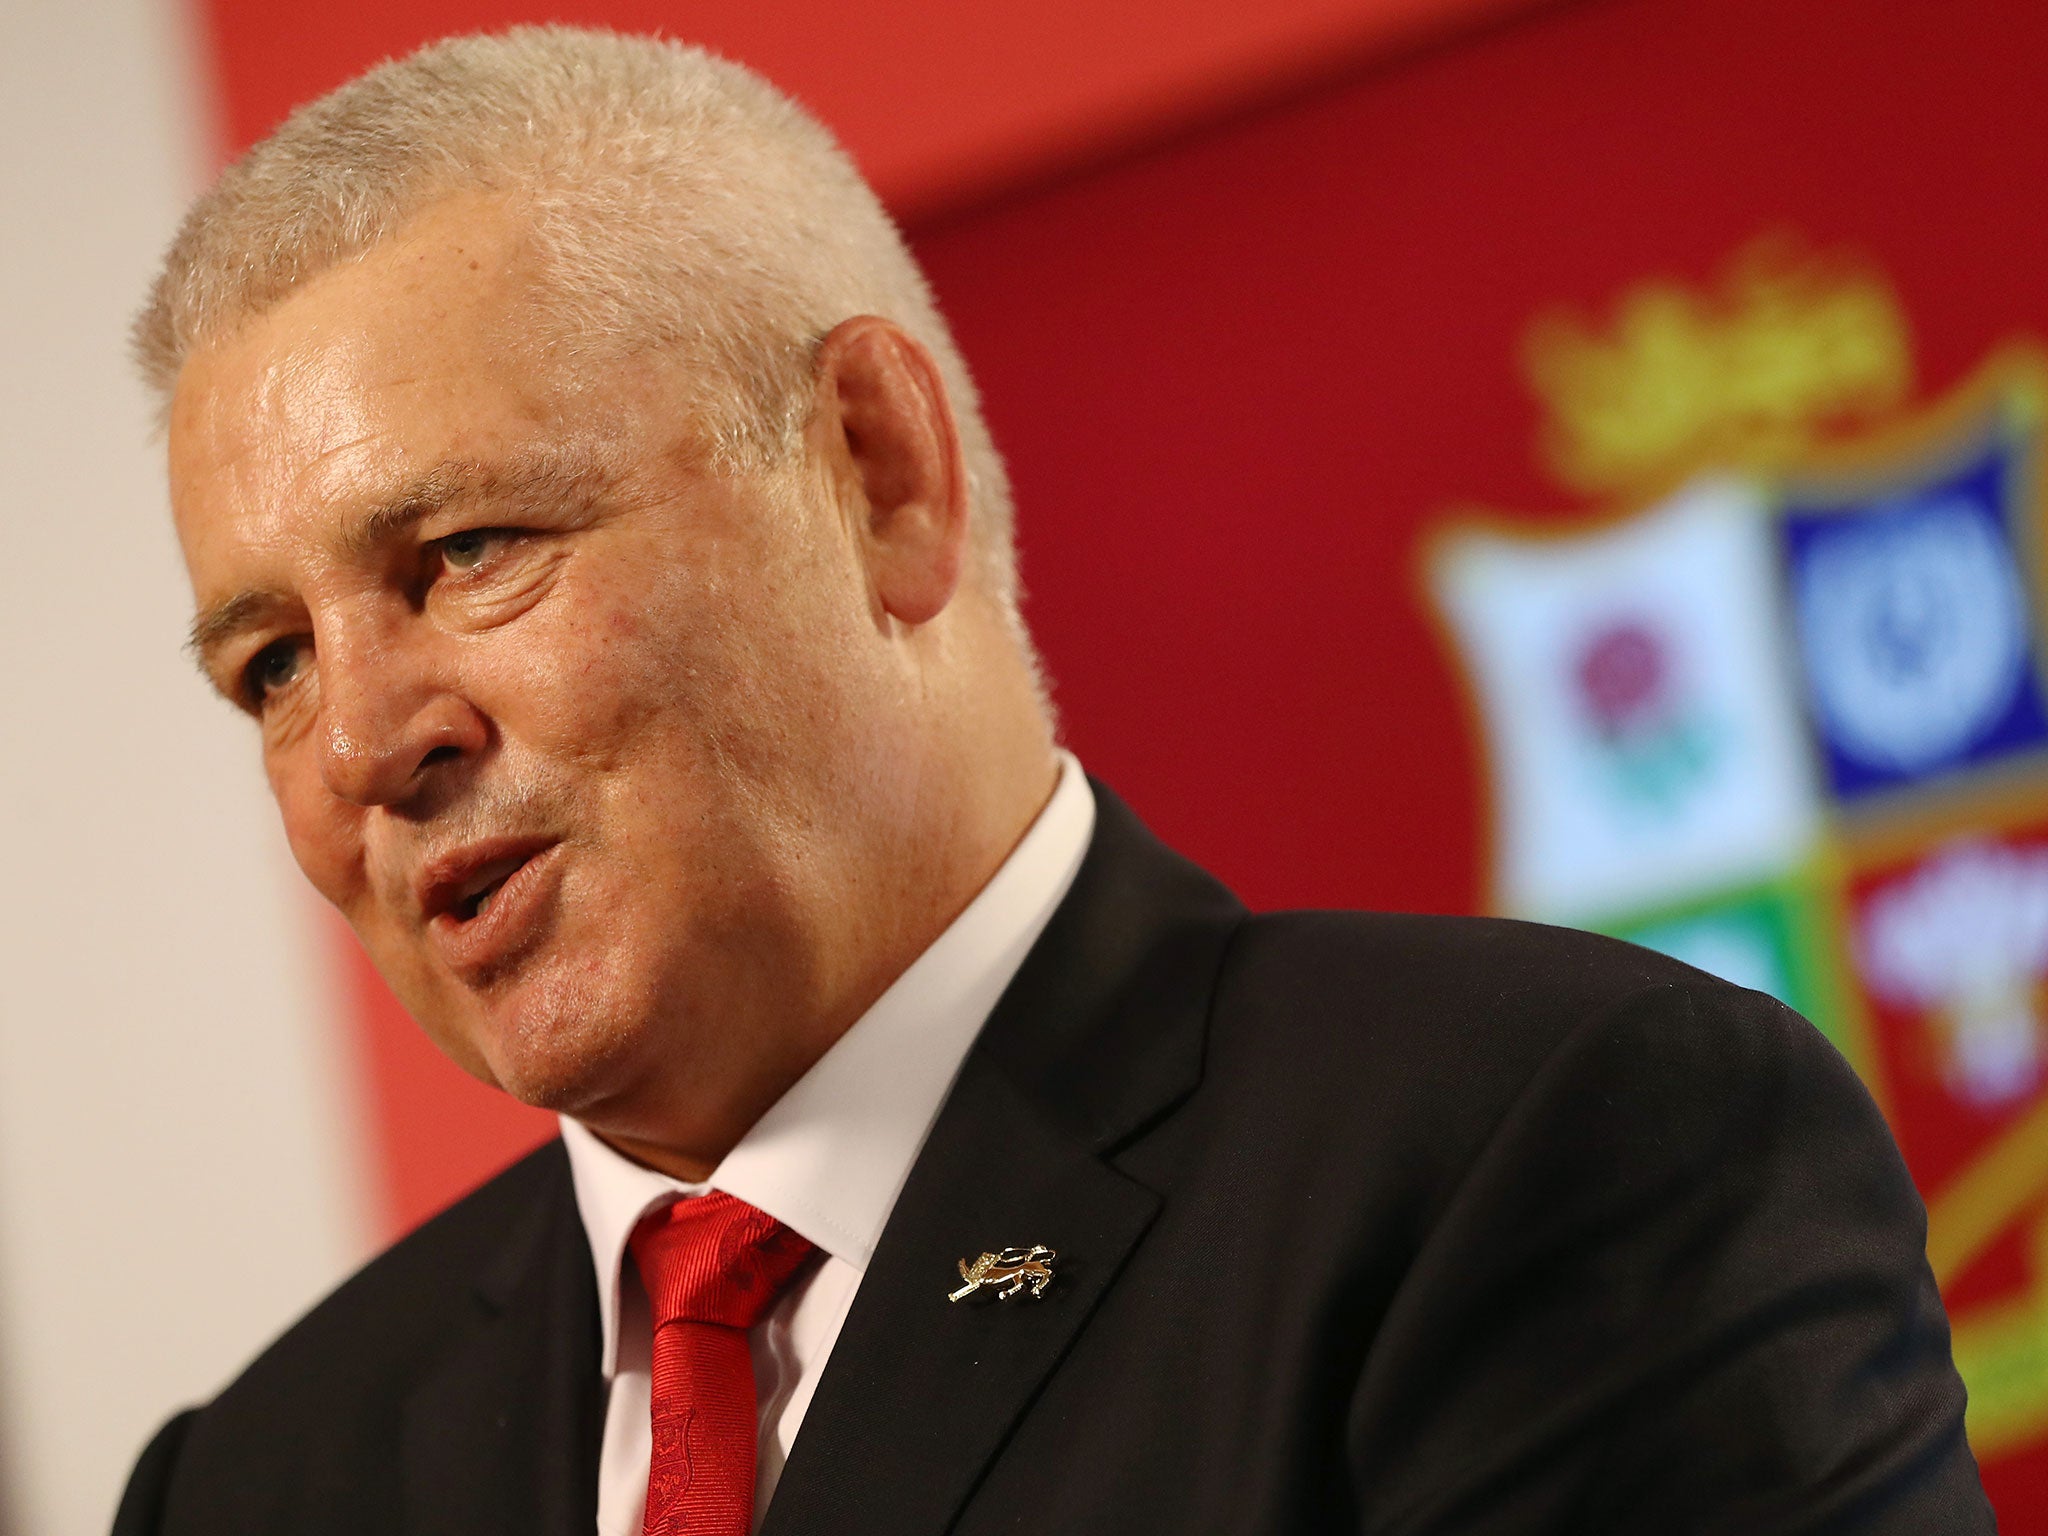 Warren Gatland will begin preparations for the Lions tour as soon as possible